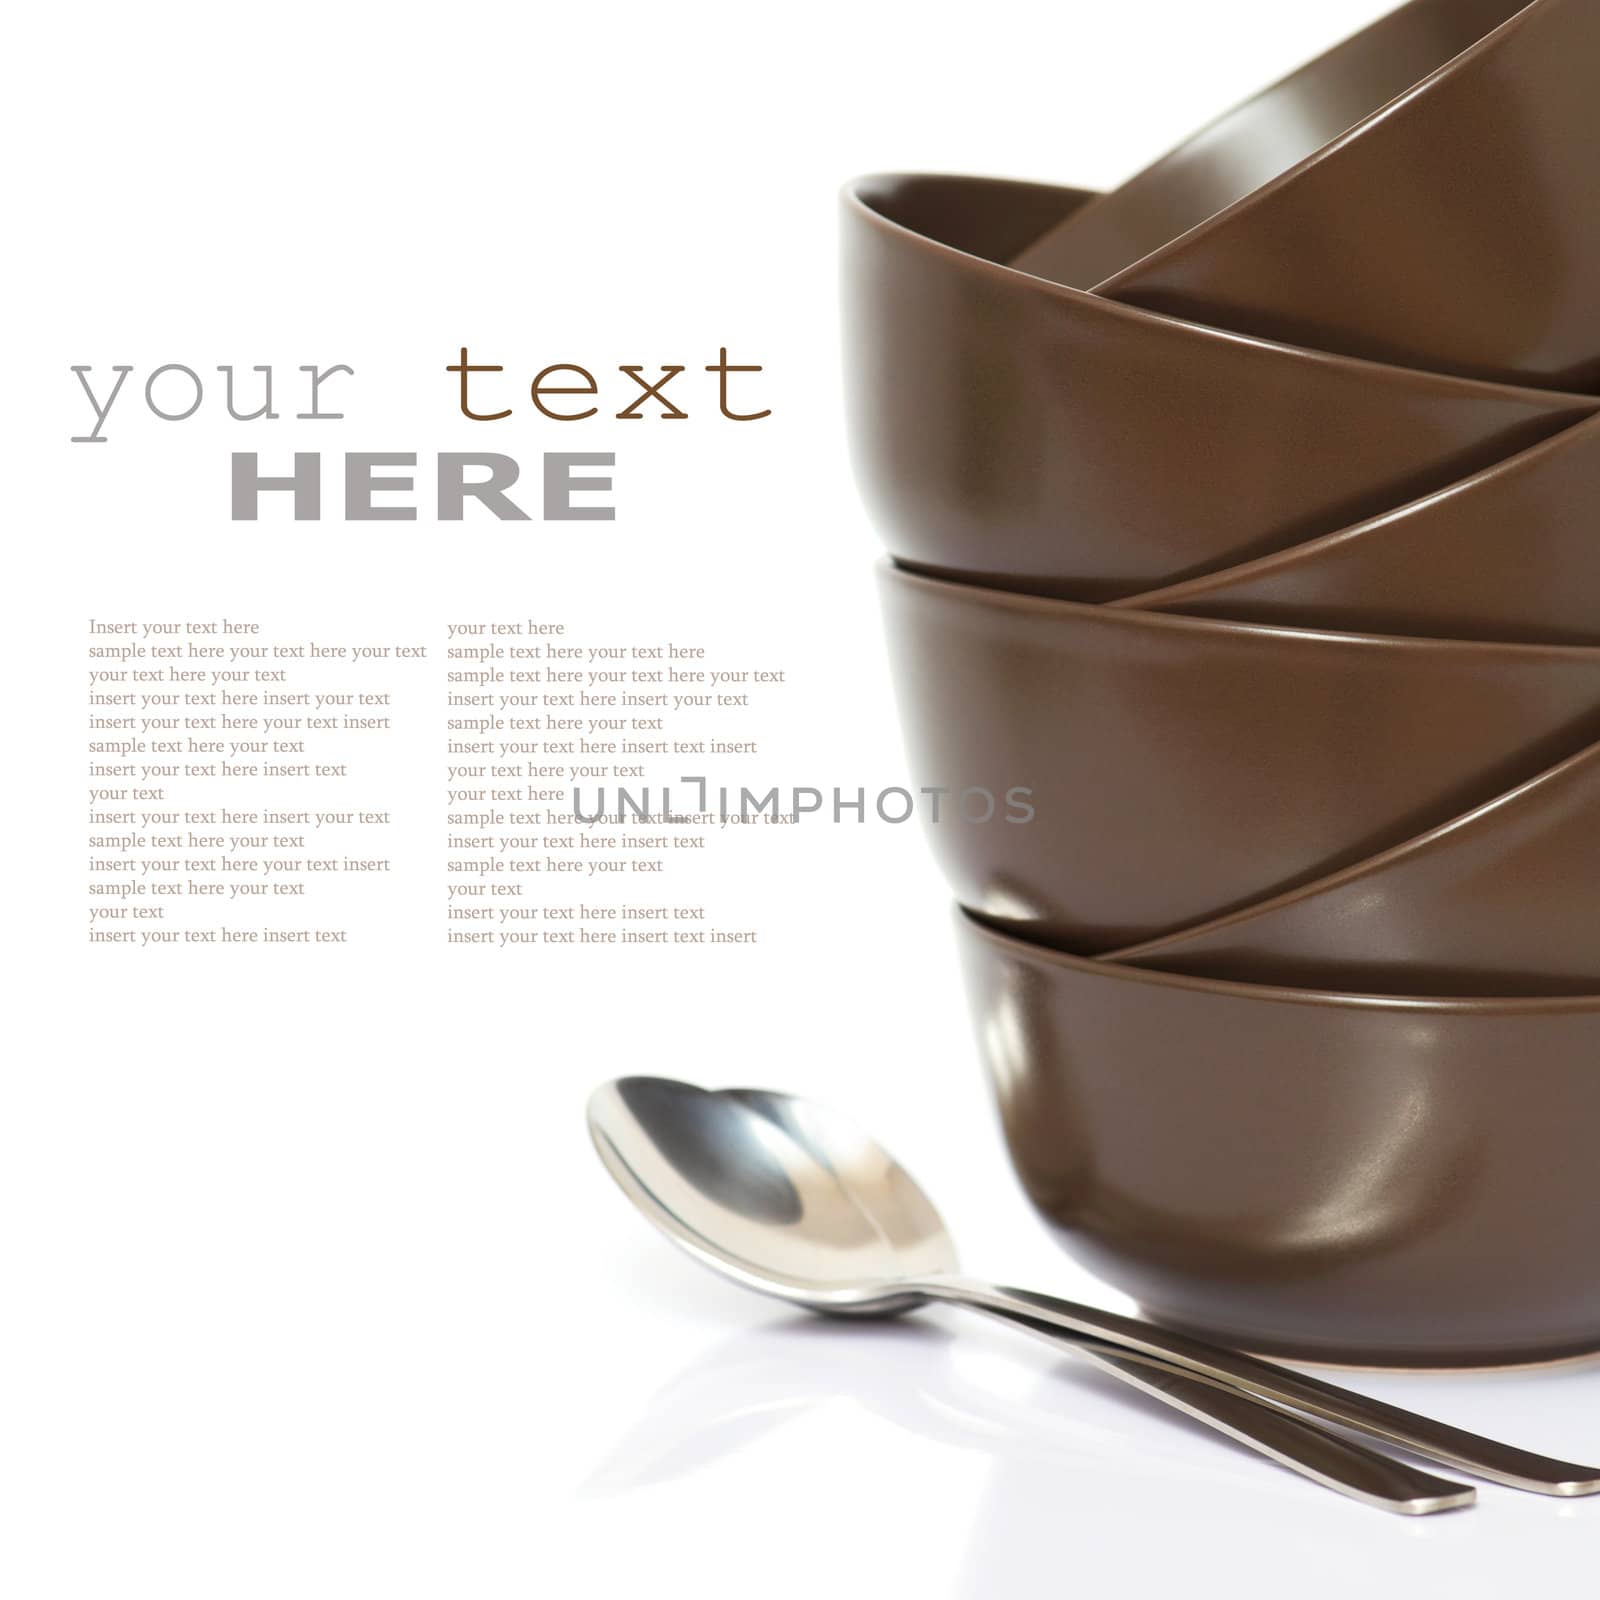 Stack of bowls and spoons(with sample text)